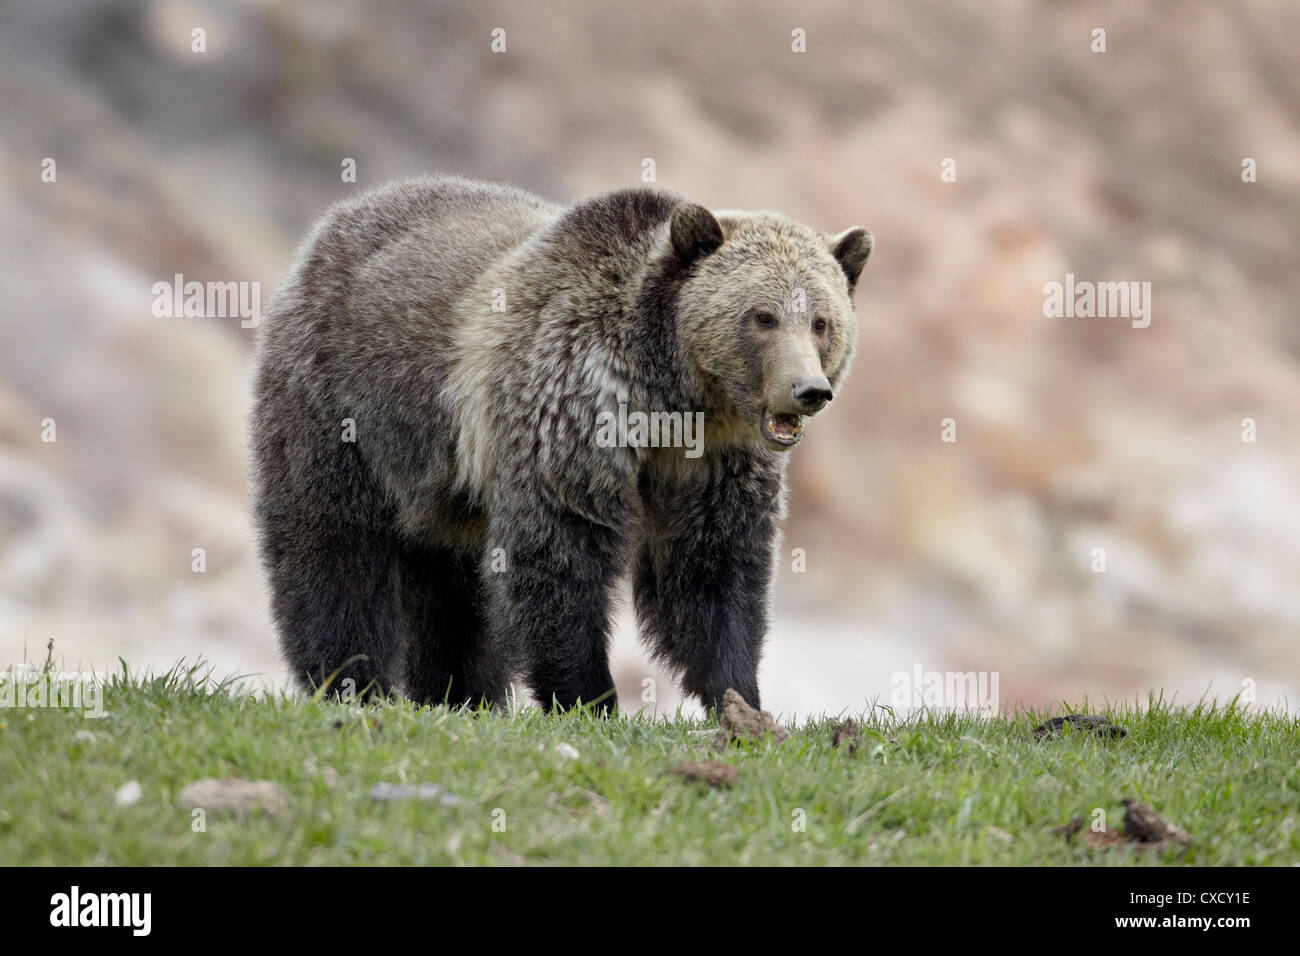 Grizzly bear (Ursus arctos horribilis), Yellowstone National Park, Wyoming, United States of America, North America Stock Photo